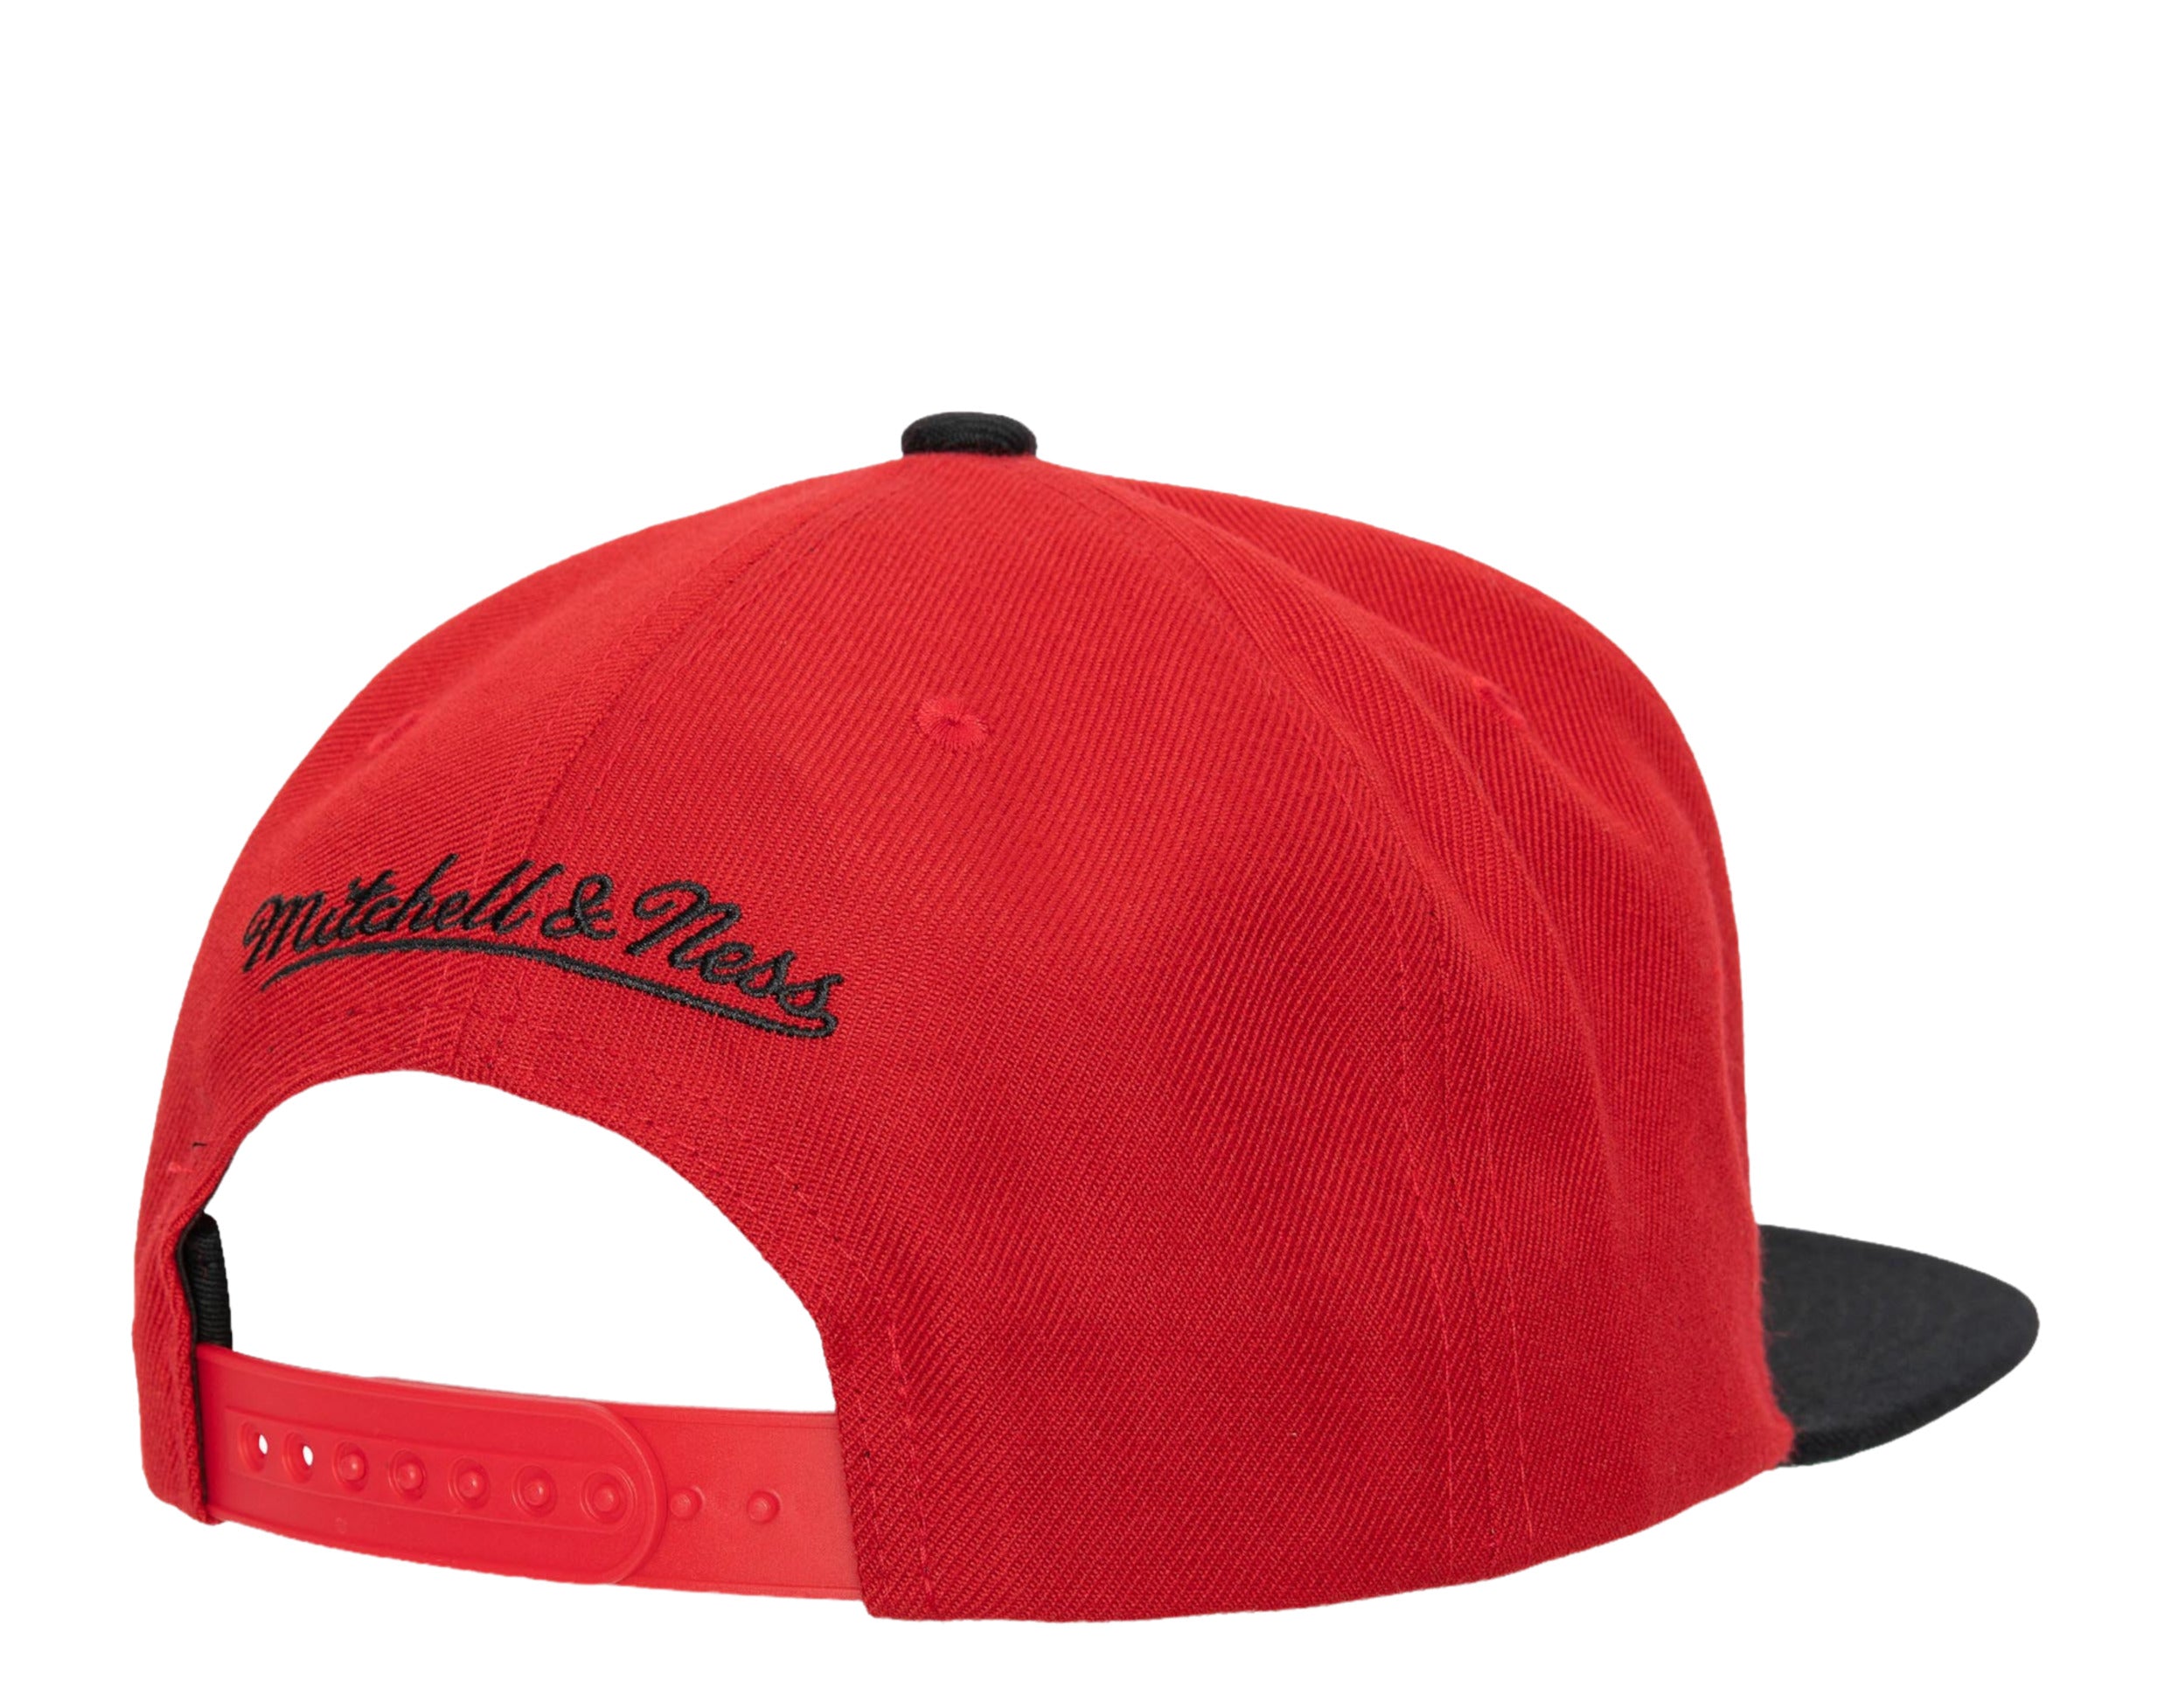 Chicago Bulls Letters Remix Mitchell & Ness Snapback Hat